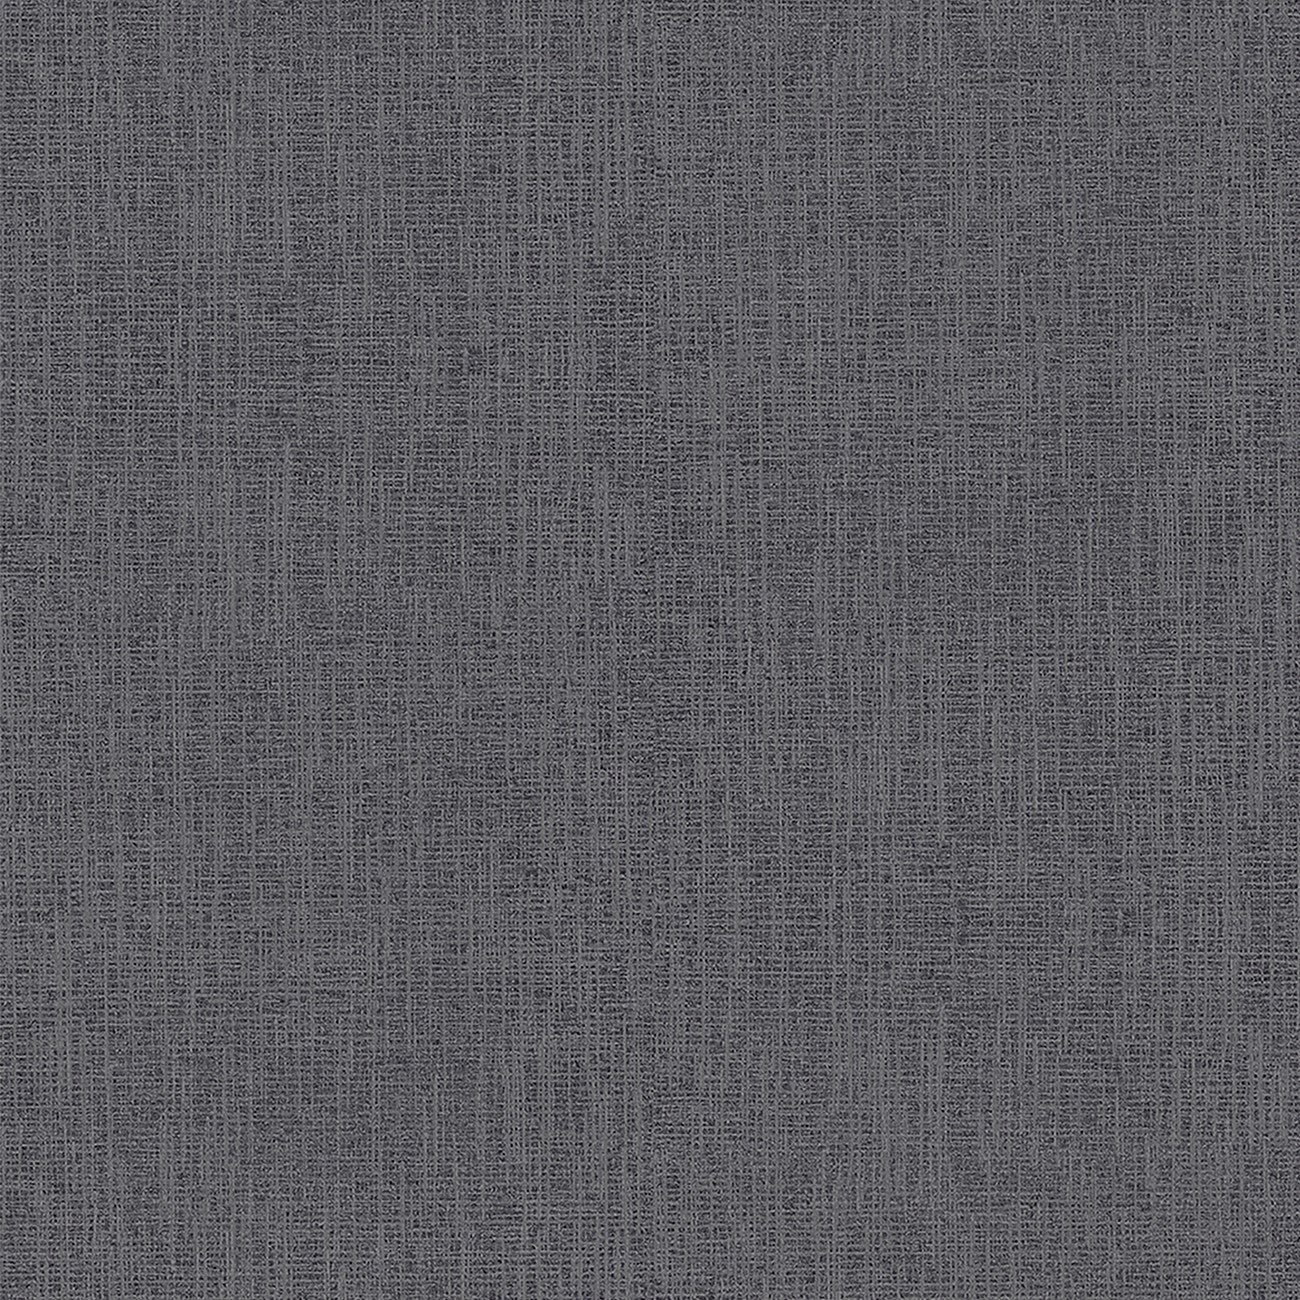 Opposites Attract Slate Woven Texture Fabric